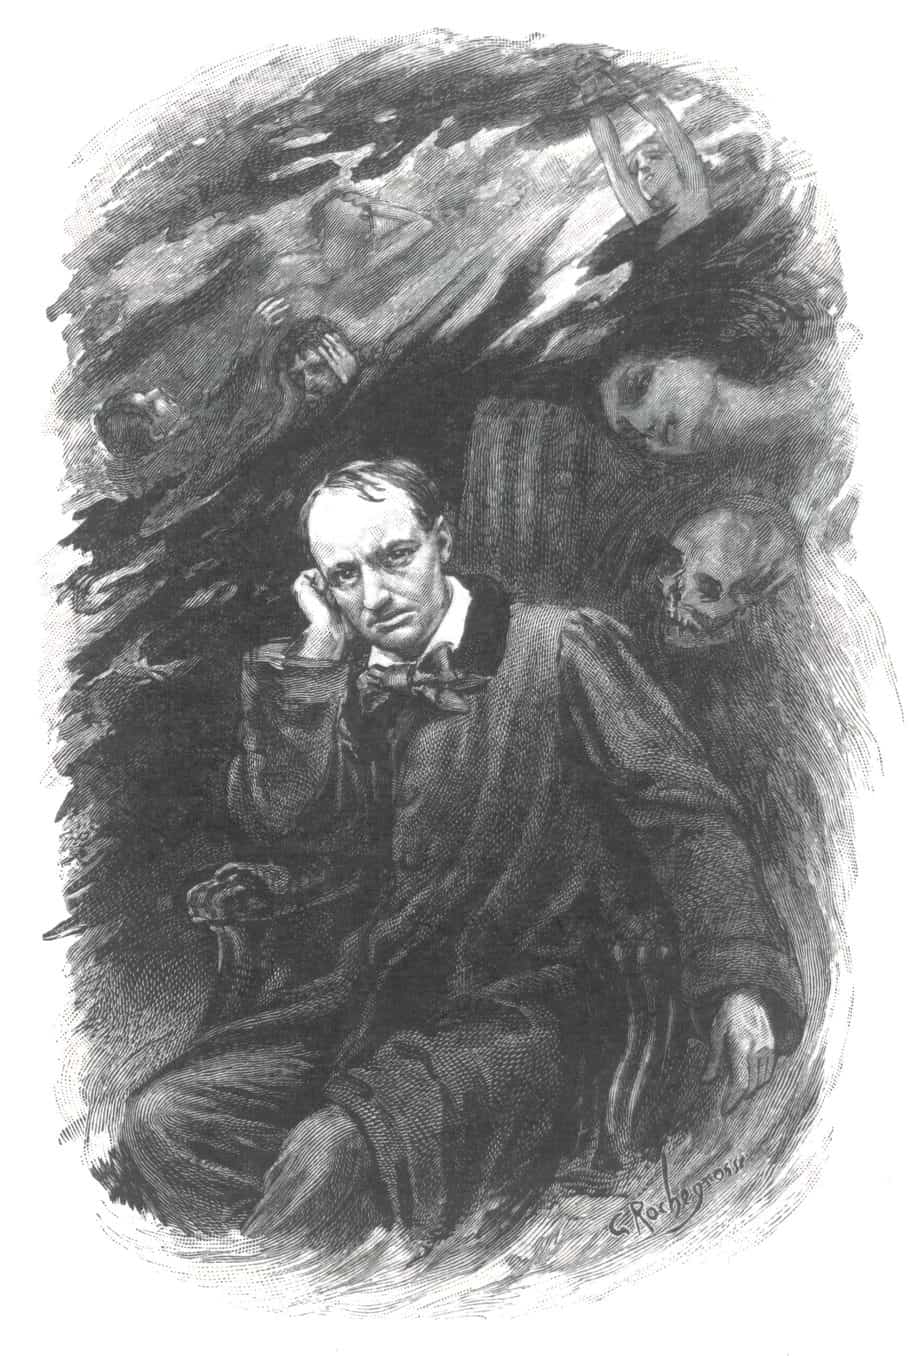 Charles Baudelaire, whose most famous work is 'Les Fleurs du mal' ('The Flowers of Evil'). Baudelaire influenced a generation of poets including Paul Verlaine or Arthur Rimbaud. He also translated stories by Edgar Allan Poe into French.